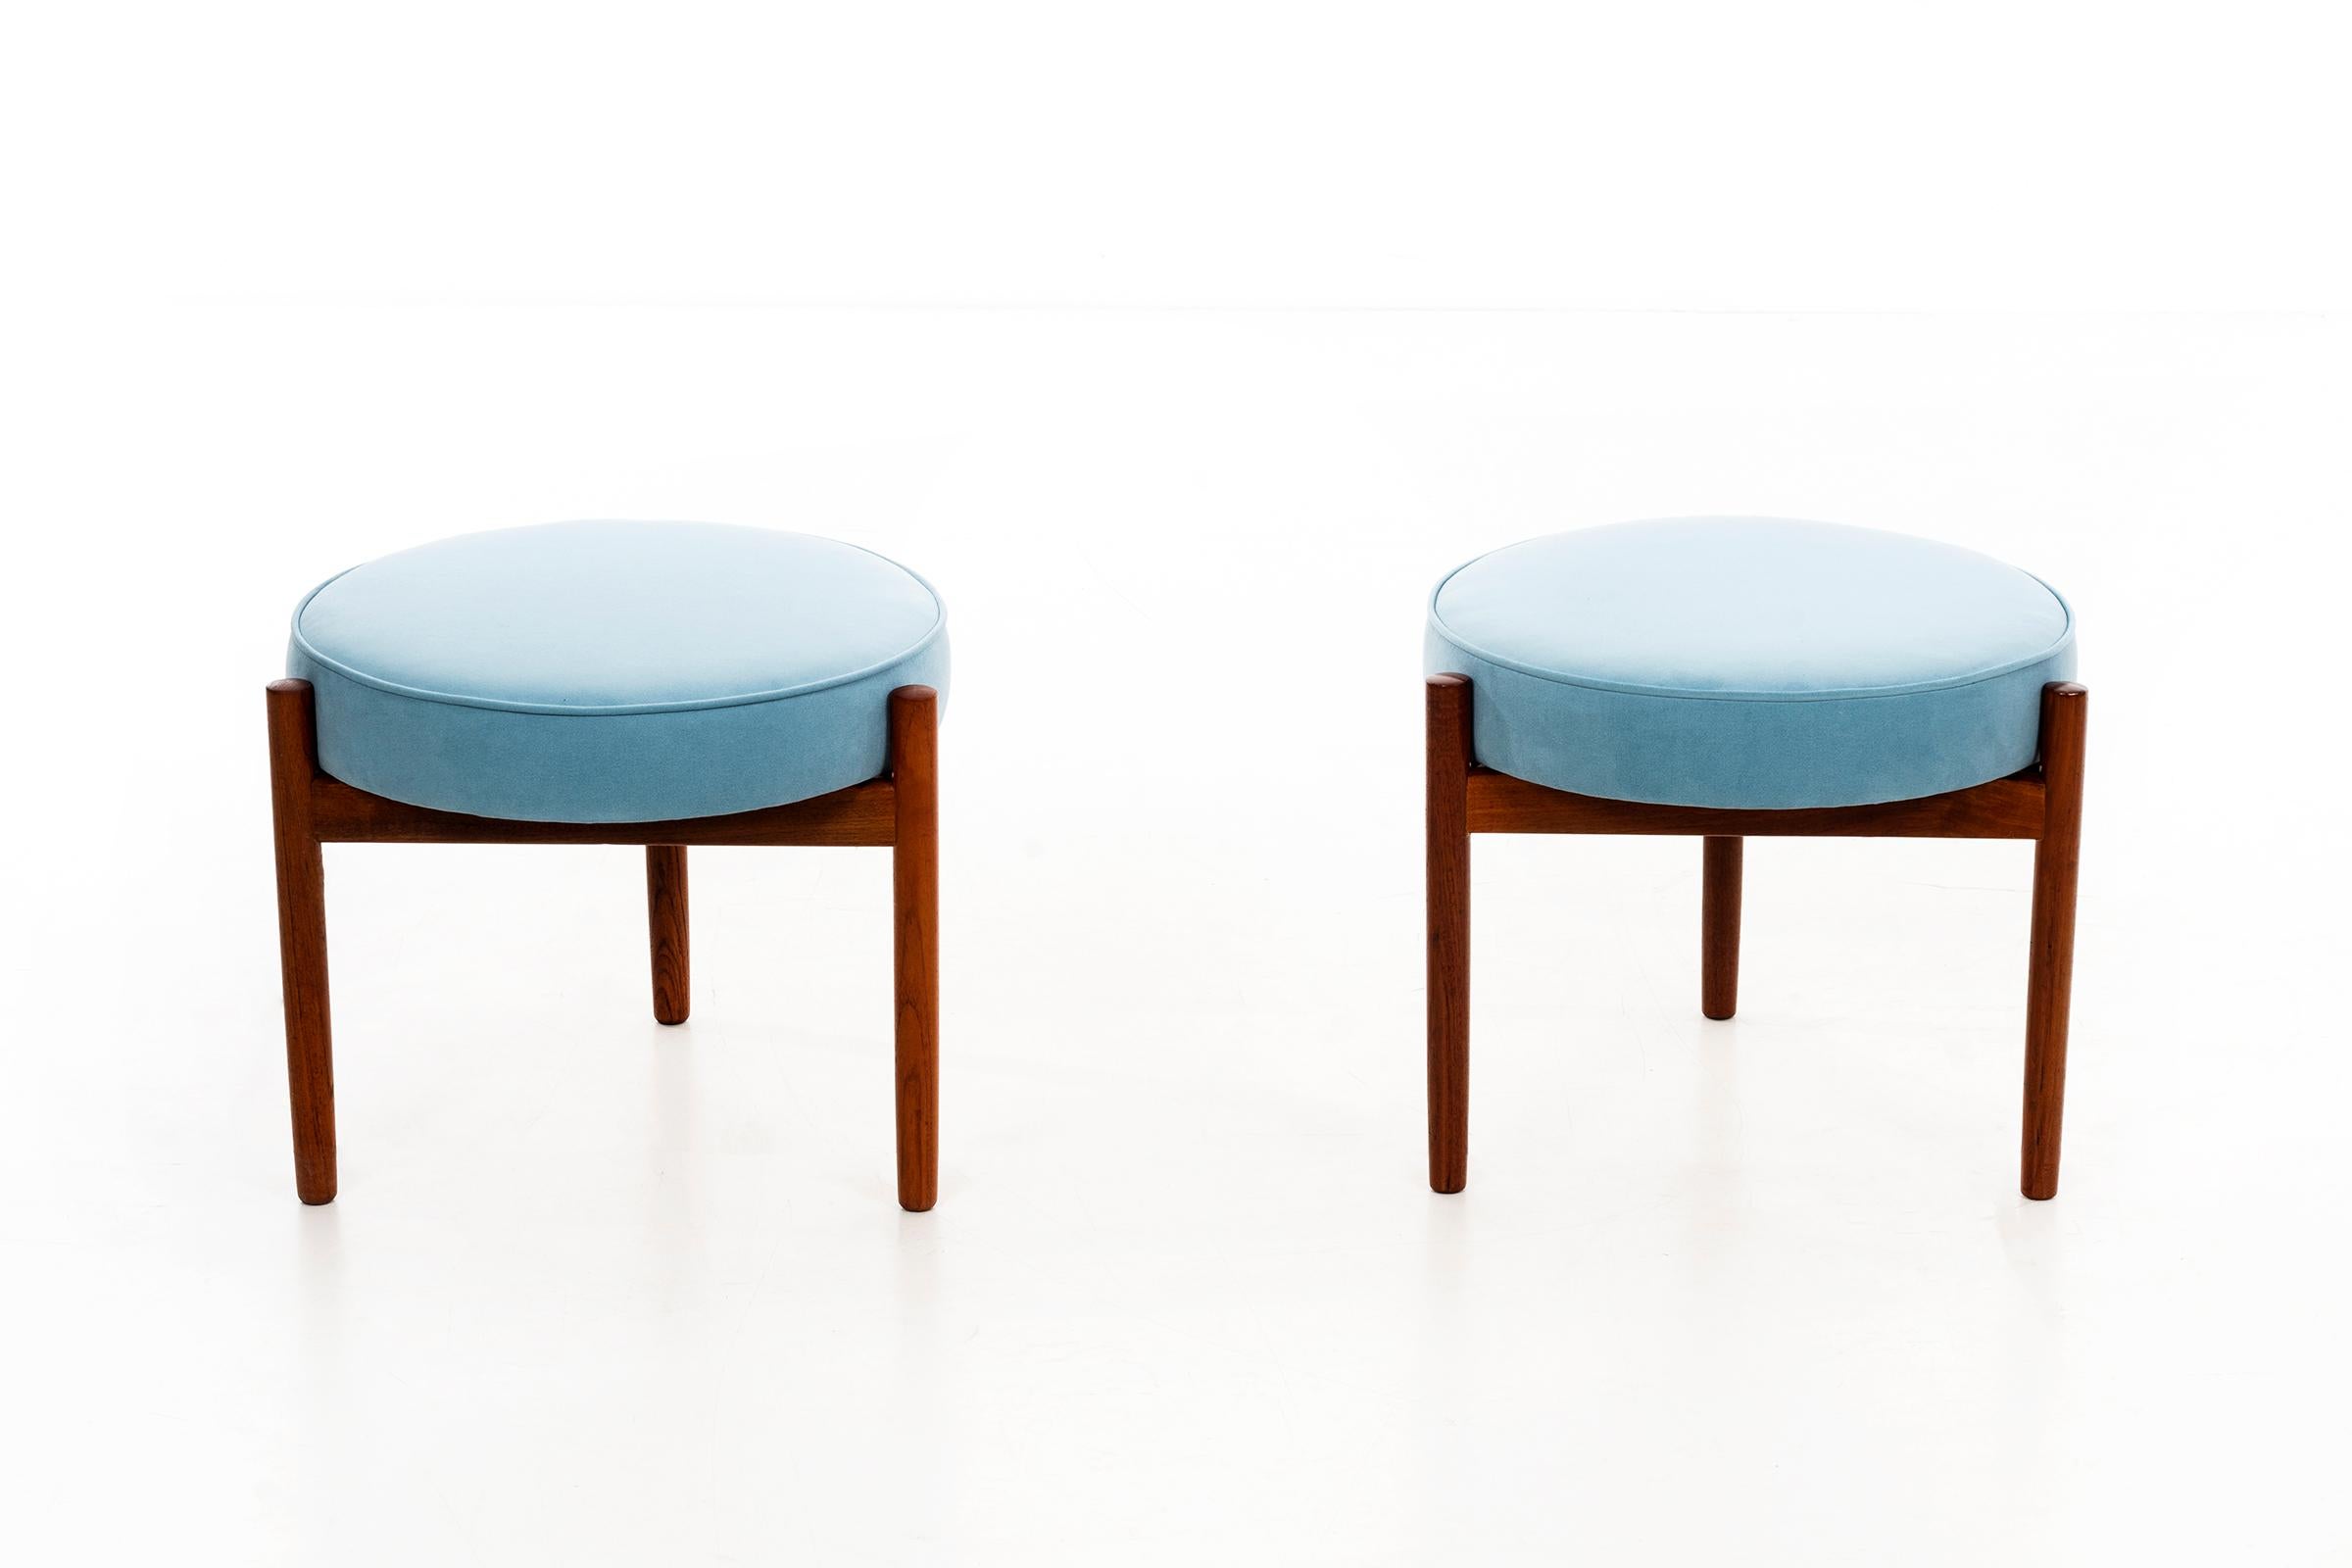 Pair of oiled walnut 3-legged stools with blue ultra suede seat cushions newly upholstered.
Danish labels on underside.